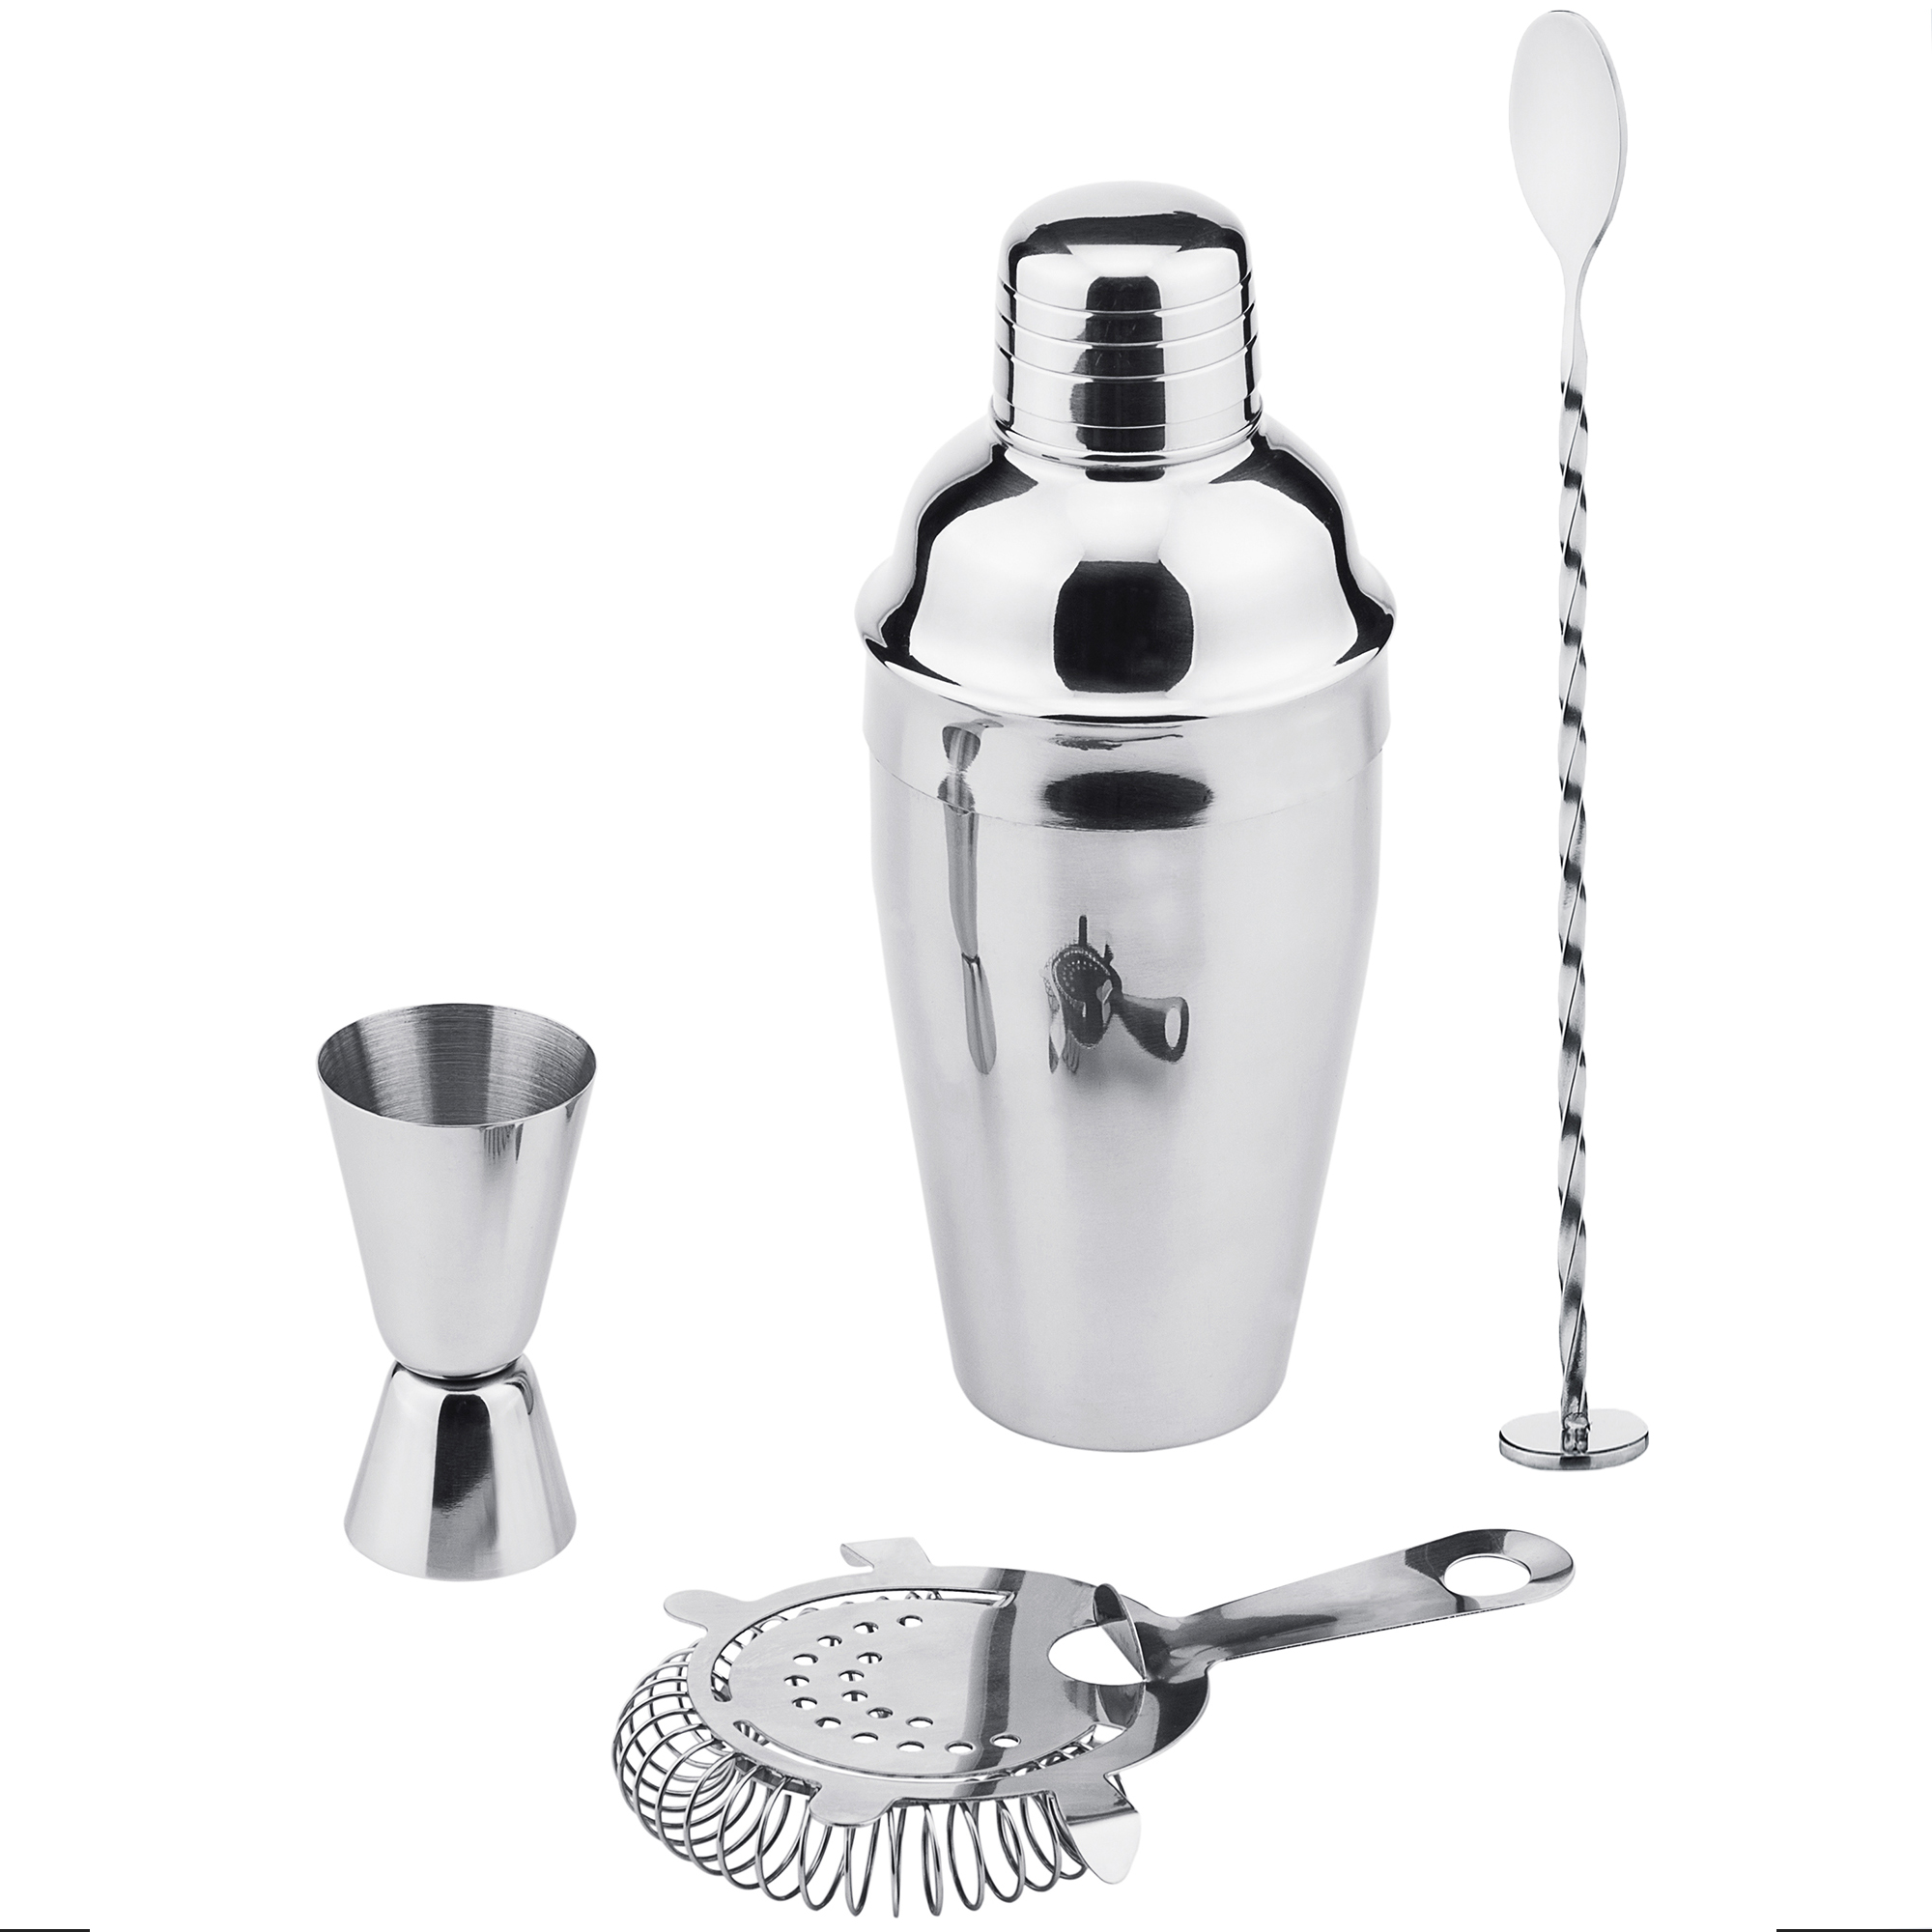 VKING Premium Bar Set Stainless Steel Cocktial Shaker Set with Cocktail Shaker Bar Jigger Mixing Spoon and Strainer with Delicate Box